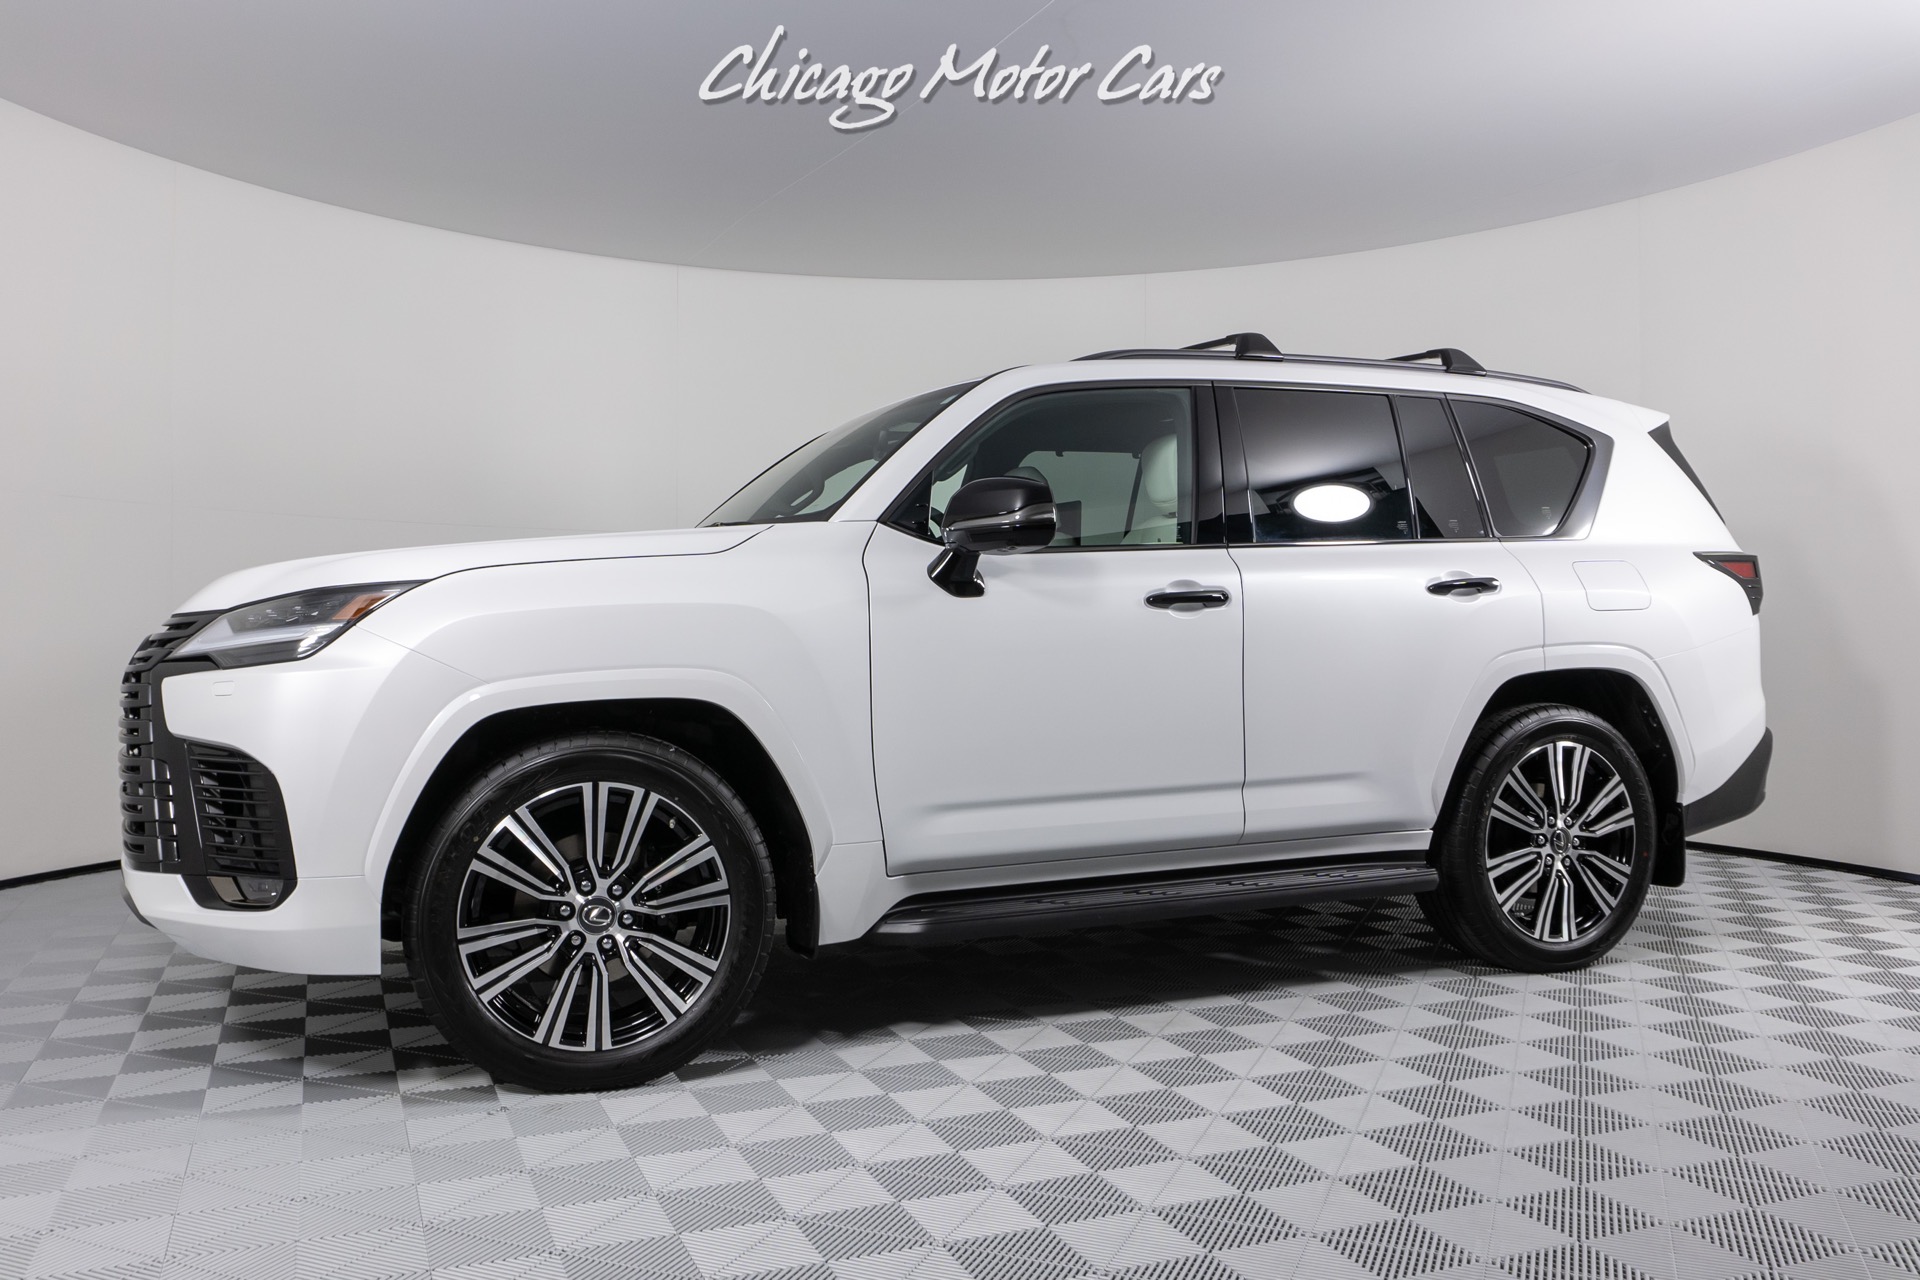 Used-2022-Lexus-LX600-Luxury-3rd-Row-SUV-power-moonroof-active-height-control-Only-13-Miles